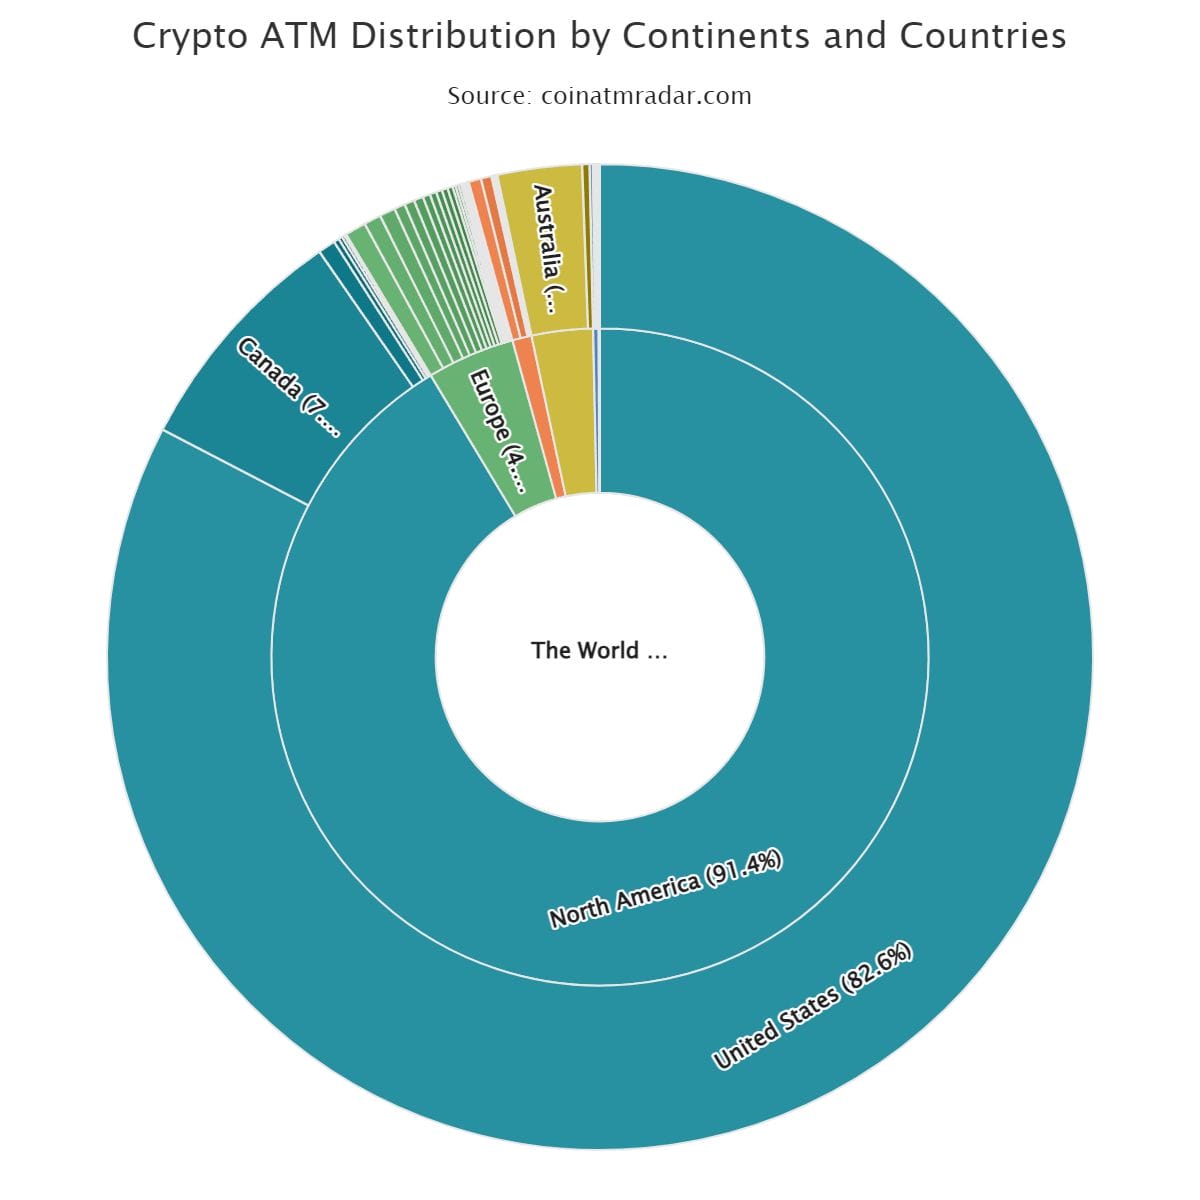 Share of crypto ATMs installed per continent and country. Source: Coin ATM Radar.